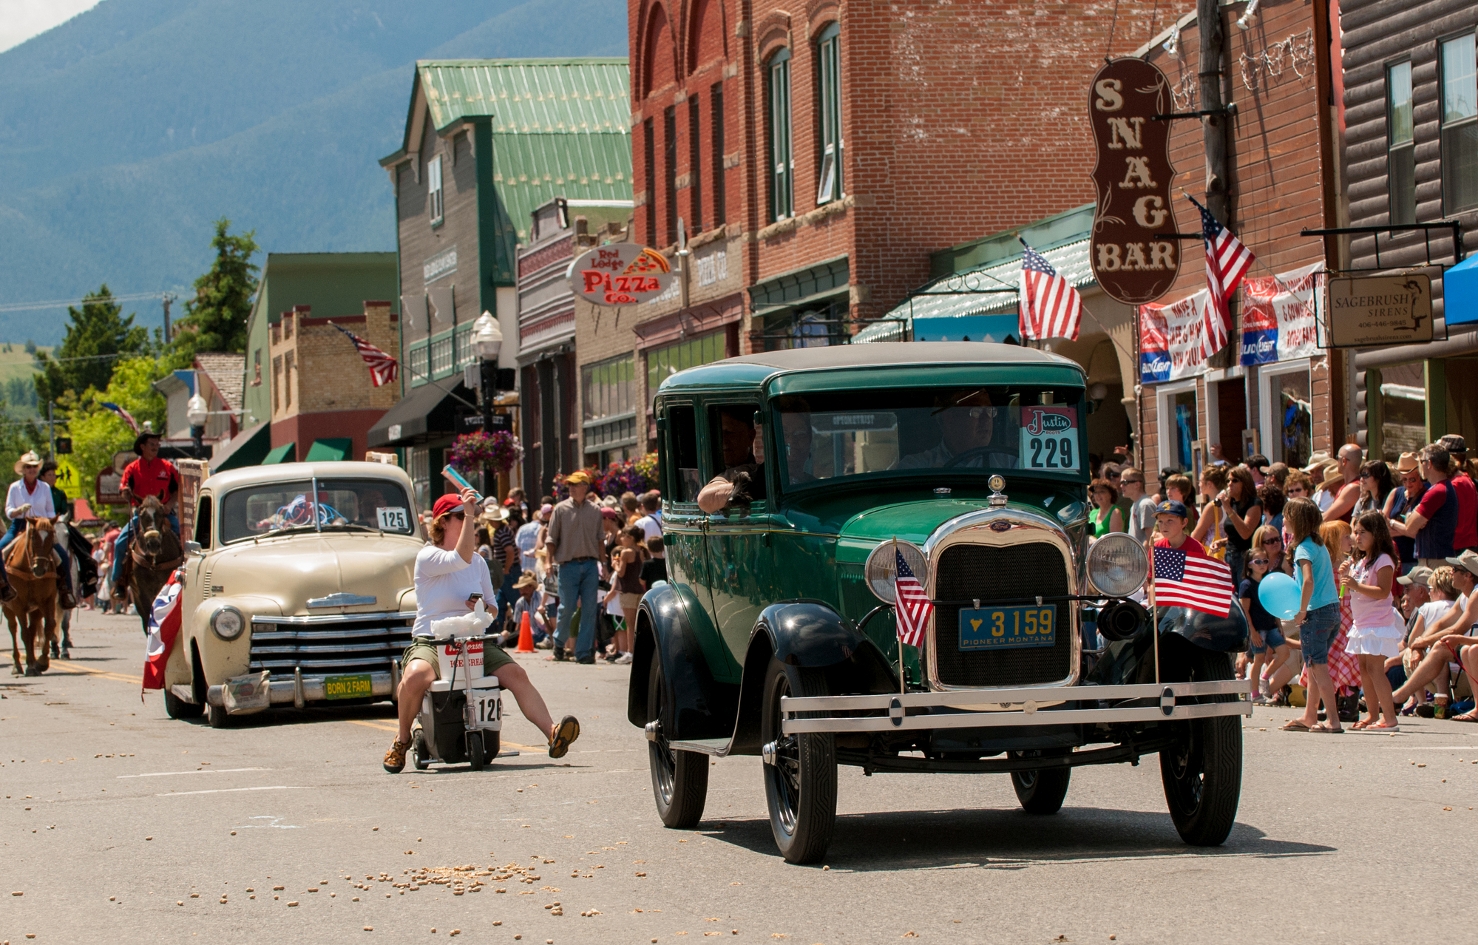 The Cutest Small Towns in Montana